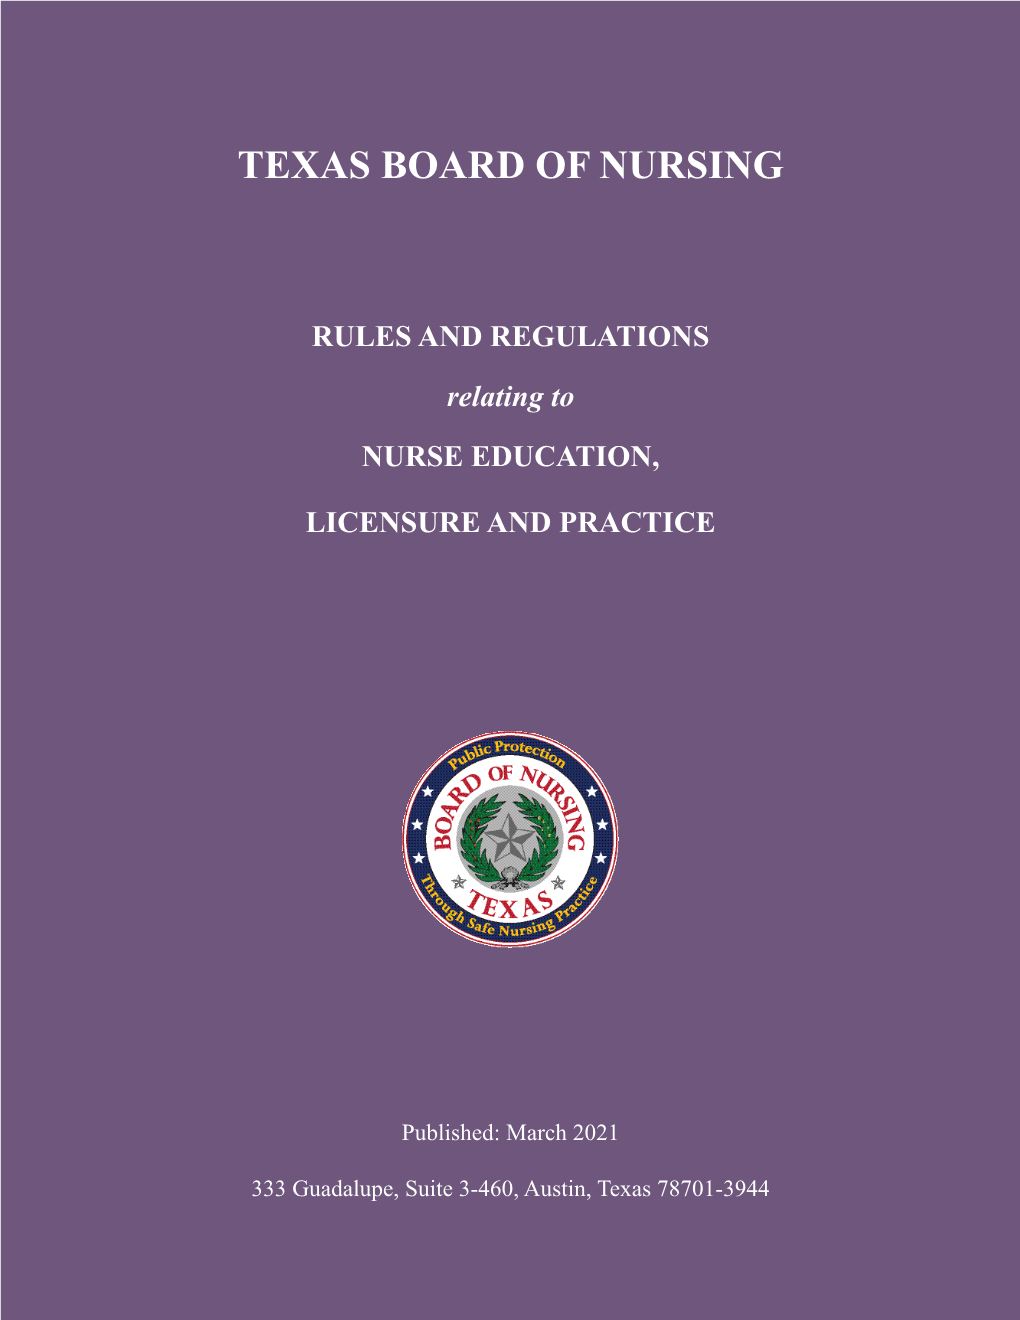 Texas Board of Nursing Rules and Regulations Relating to Nurse